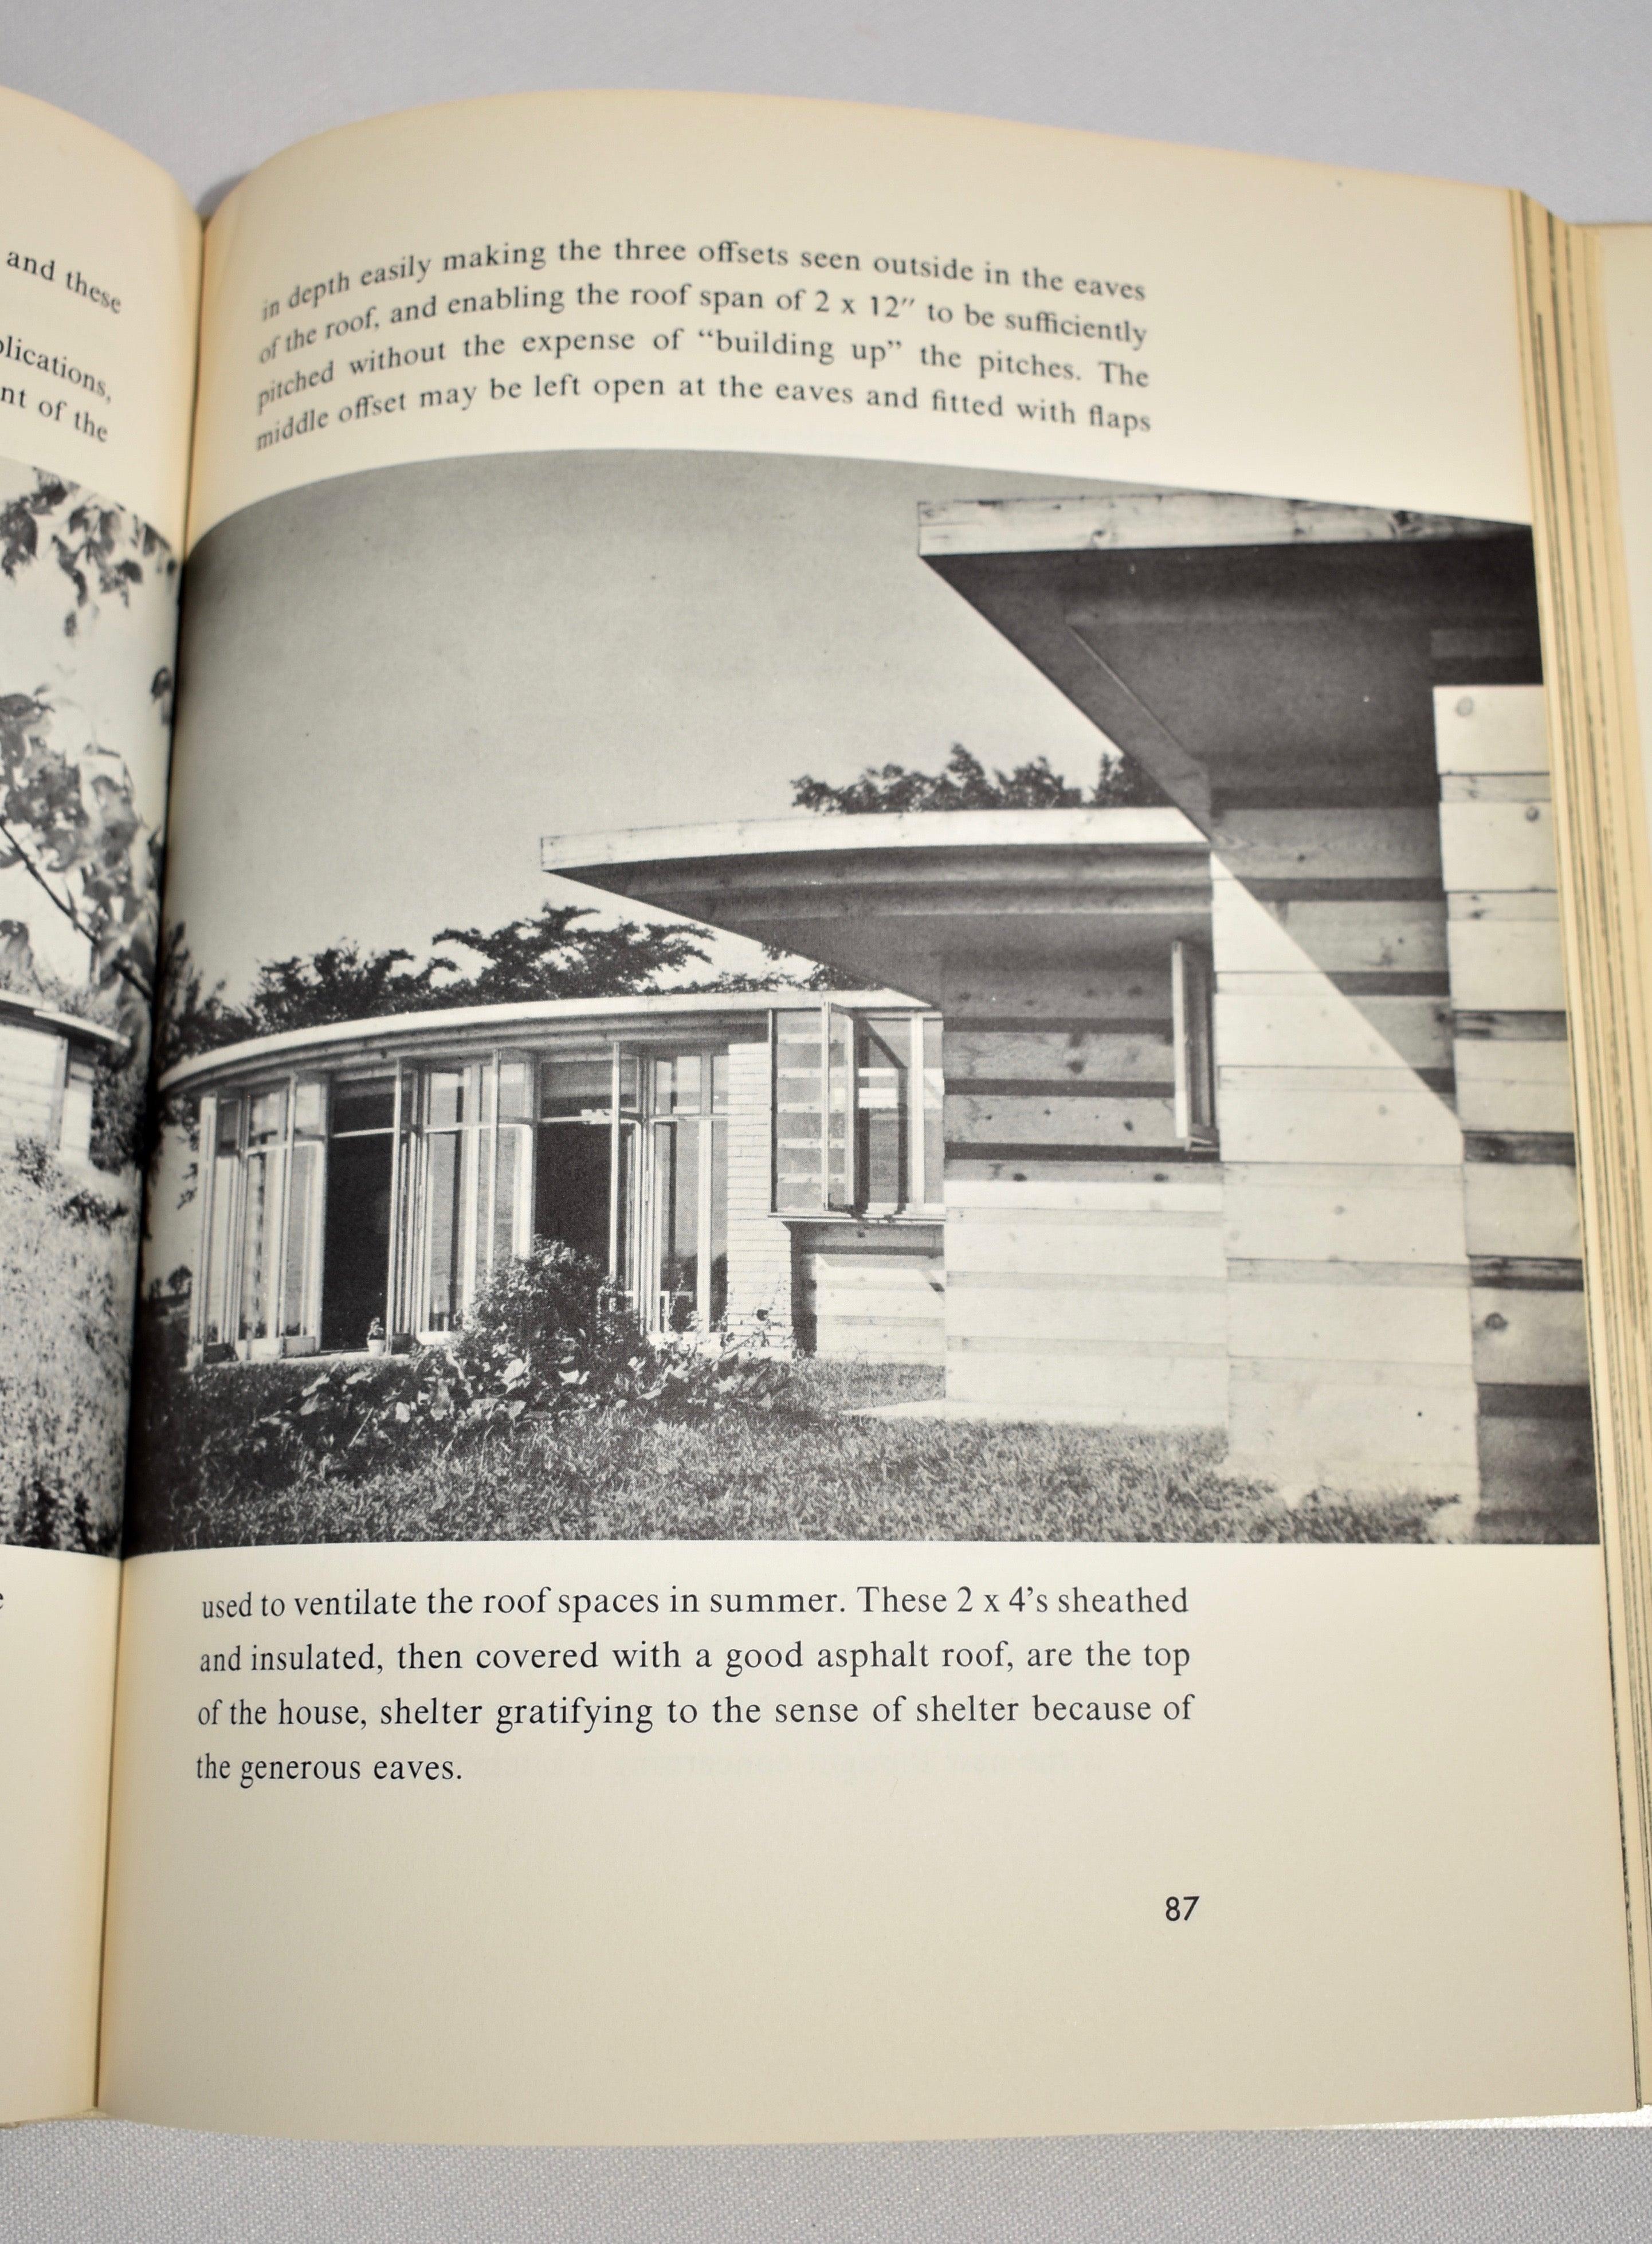 Vintage hardback coffee table book featuring the concept for a natural house by architect Frank Lloyd Wright. By Frank Lloyd Wright, published in 1954. First edition, 223 pages.

